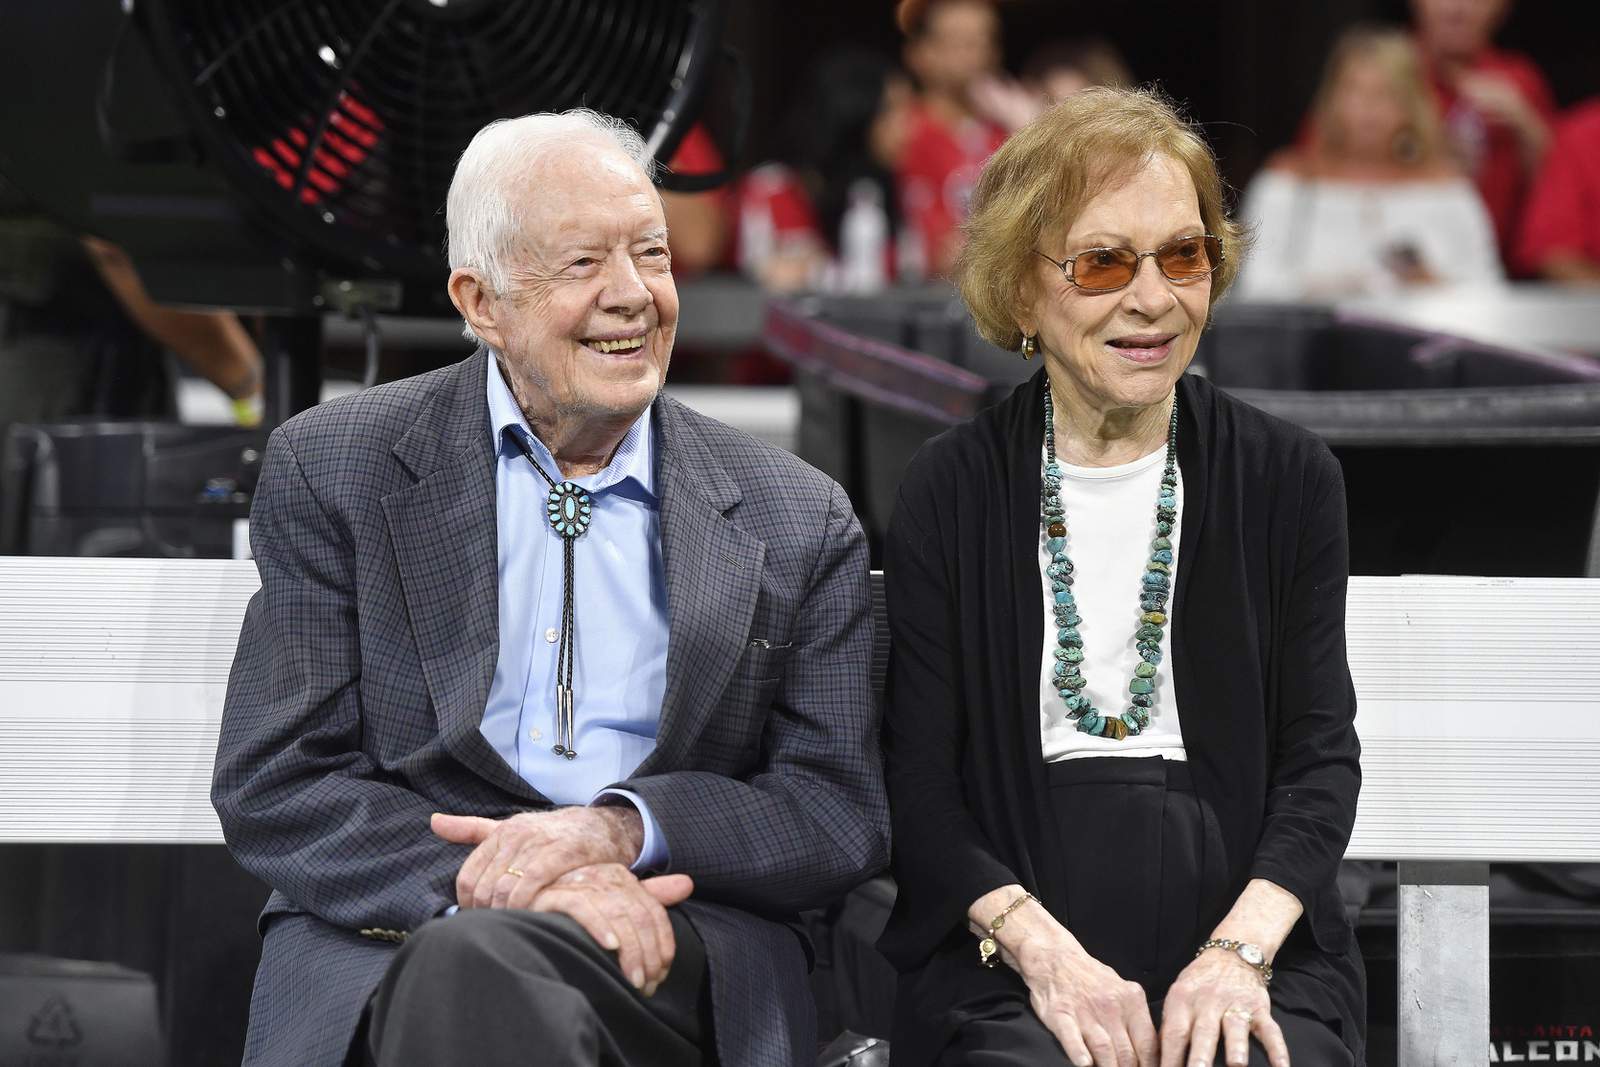 Vaccinated for virus, Jimmy Carter and wife back in church